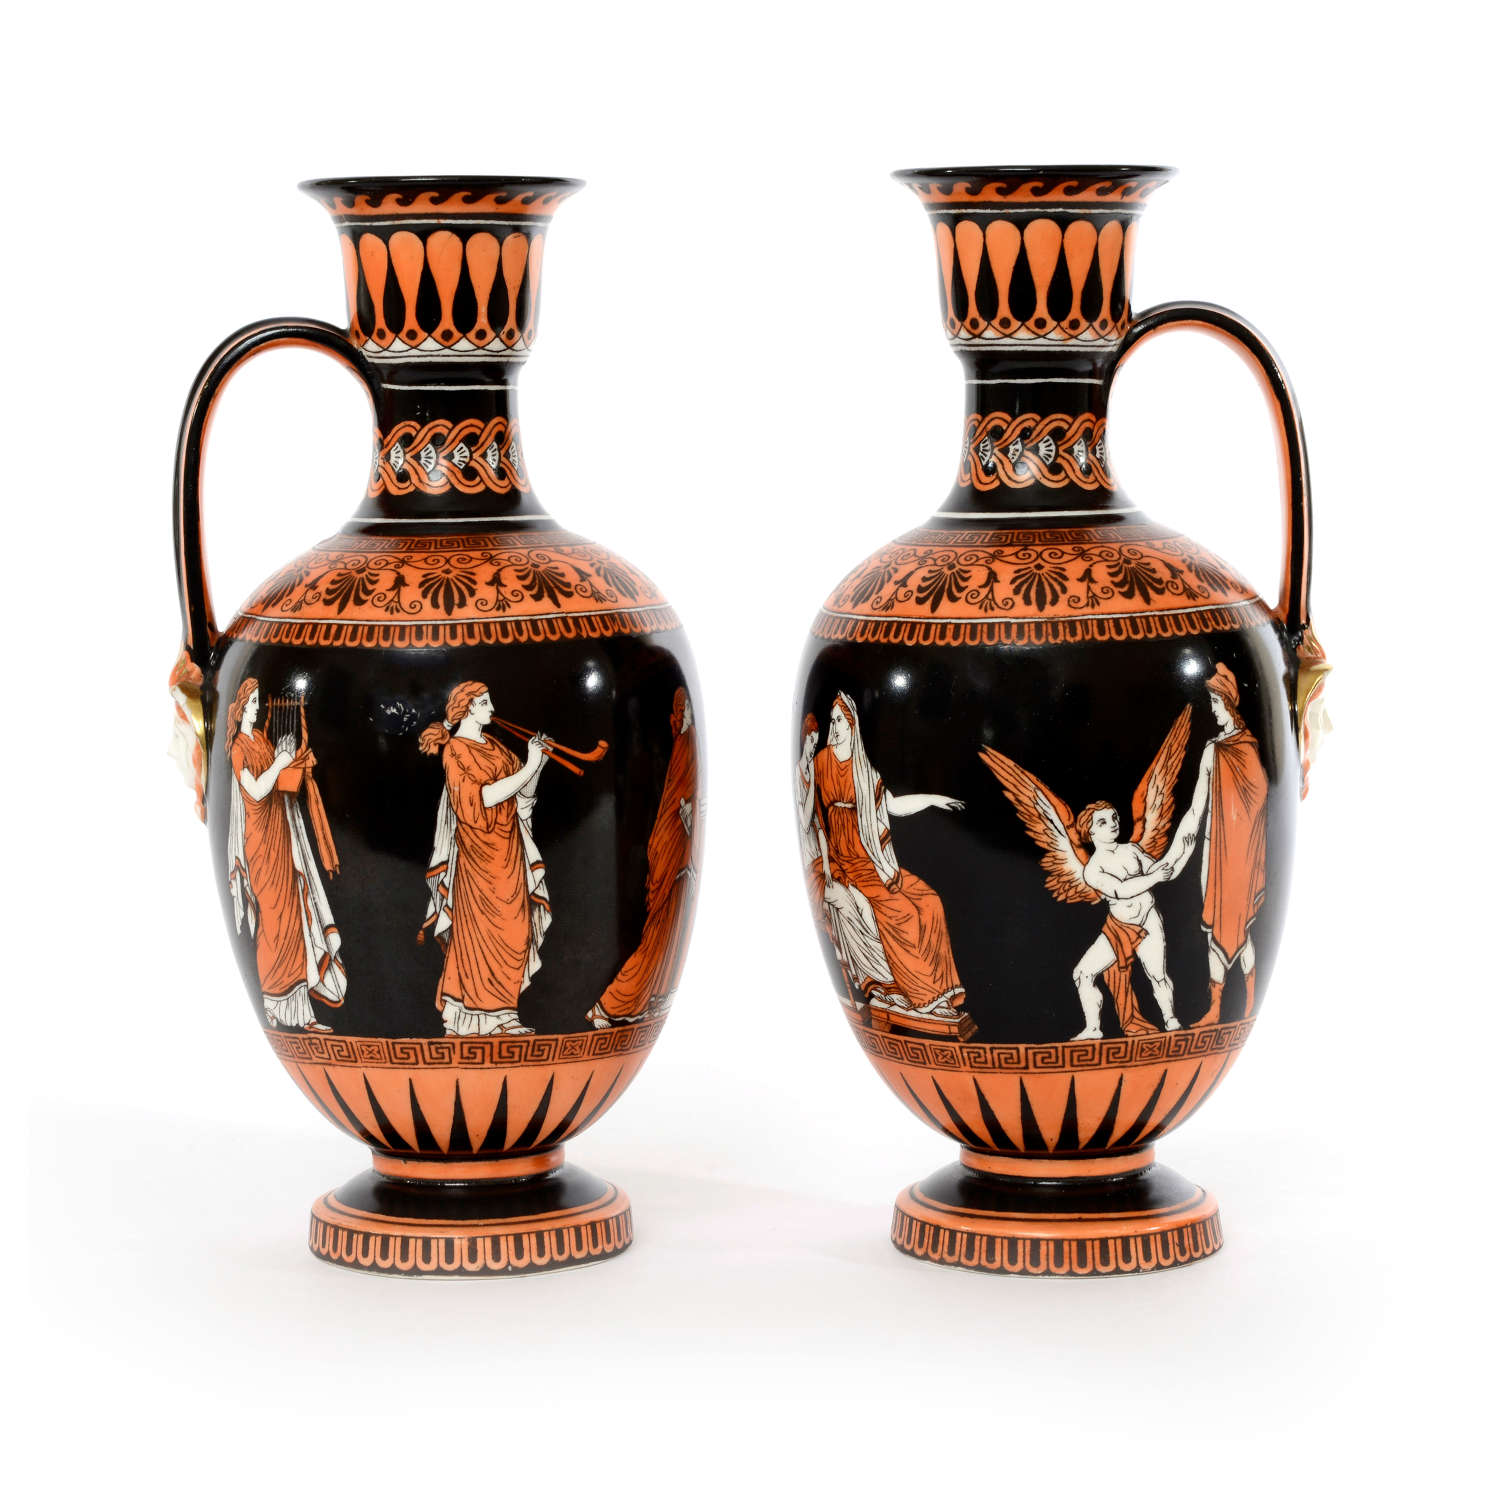 A pair of Victorian Greek revival vases by Samuel Alcock & Co.